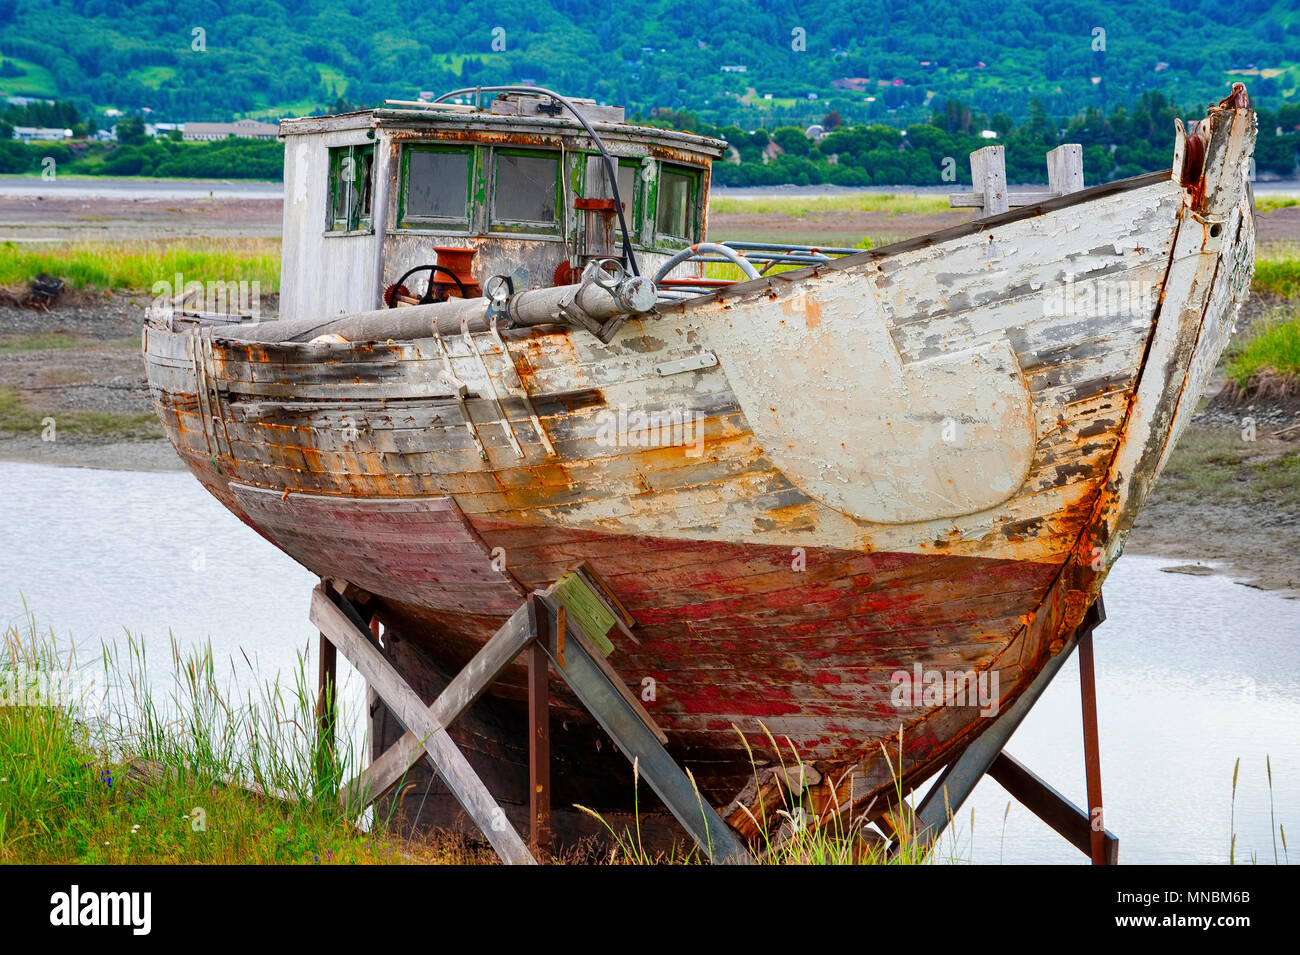 Decaying abandonded boat, sitting on a dry dock rack, in a grassy field seen from walking path along the shores of Kachemak Bay in Homer Alaska. Stock Photo